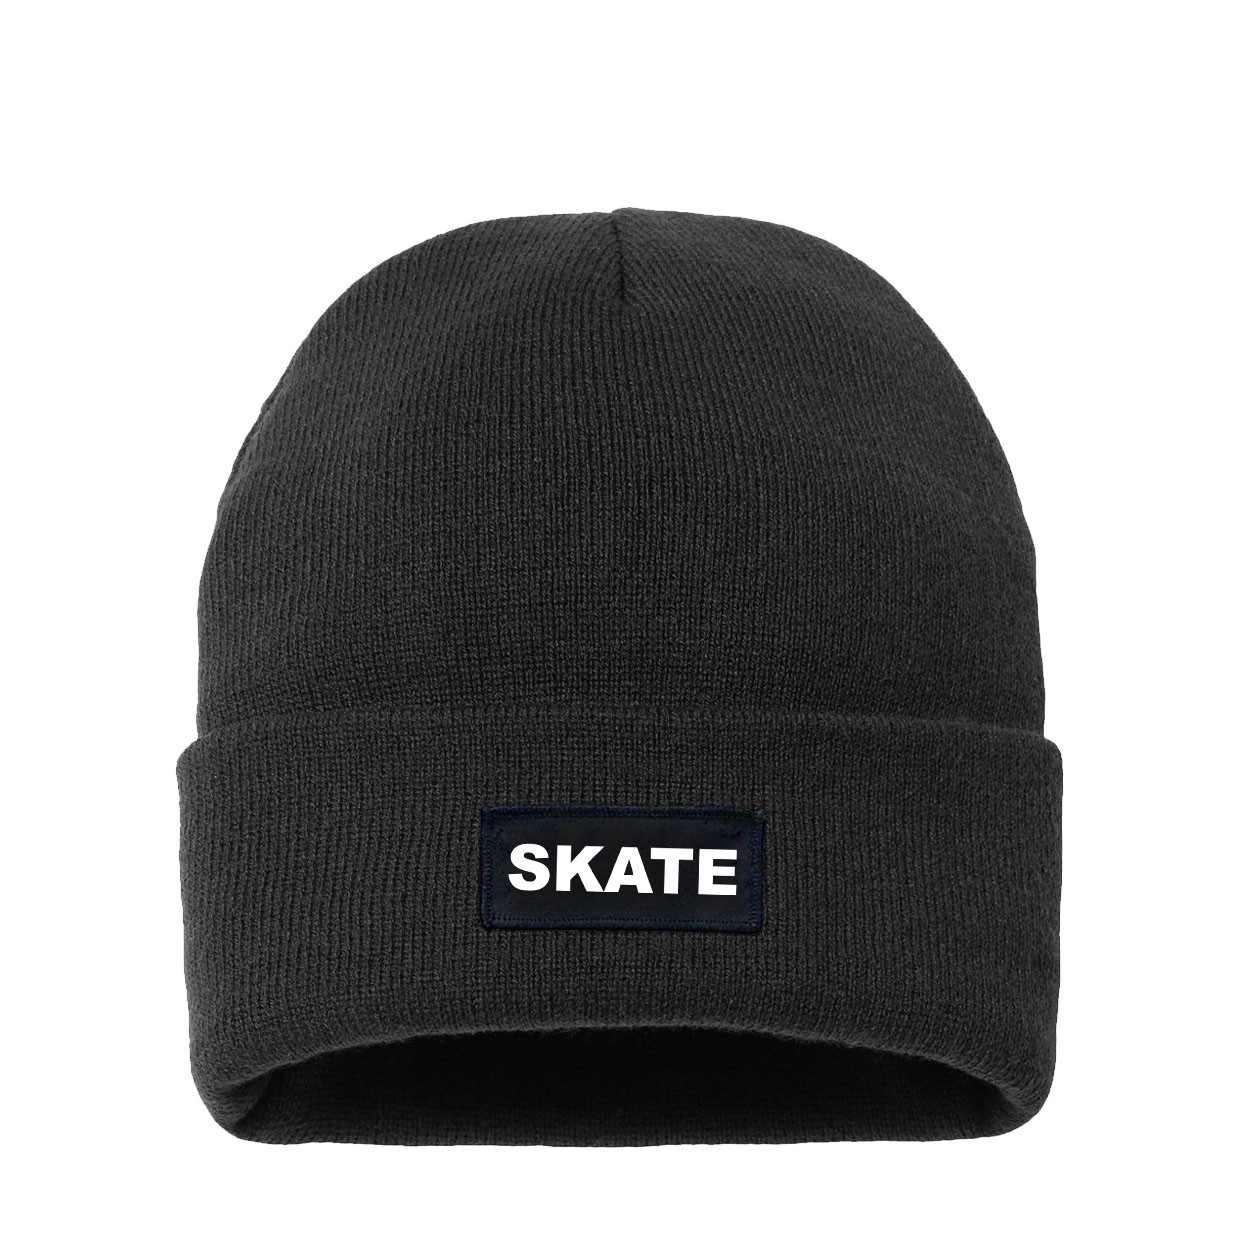 Skate Brand Logo Night Out Woven Patch Night Out Sherpa Lined Cuffed Beanie Black